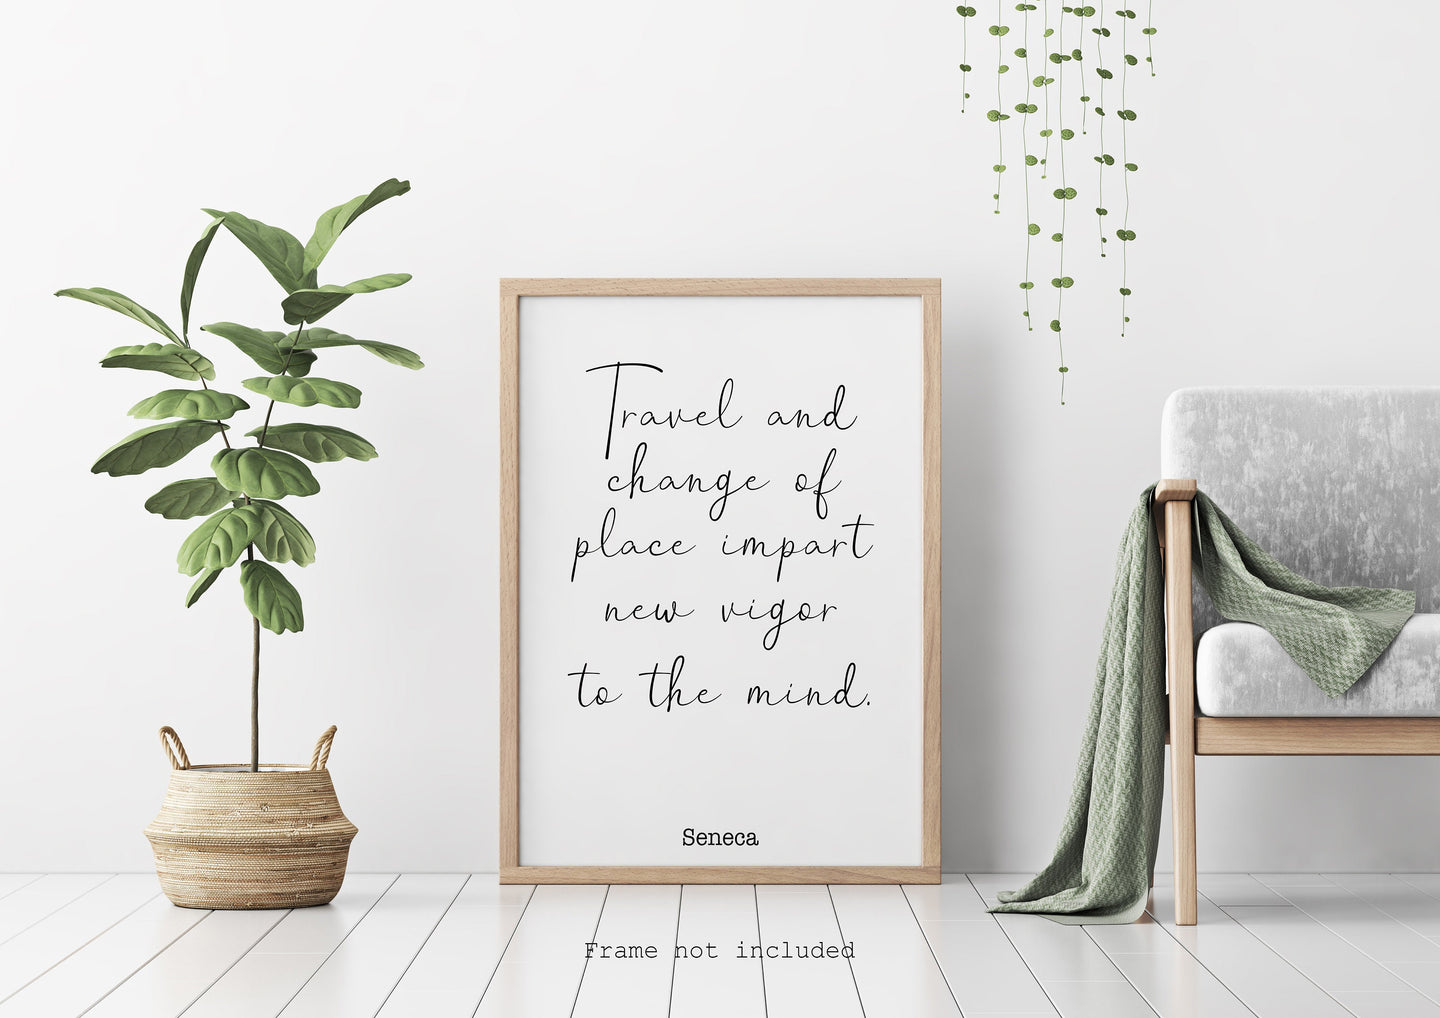 Travel Poster Seneca Quote - Travel and change of place impart new vigor to the mind - Travel wall decor